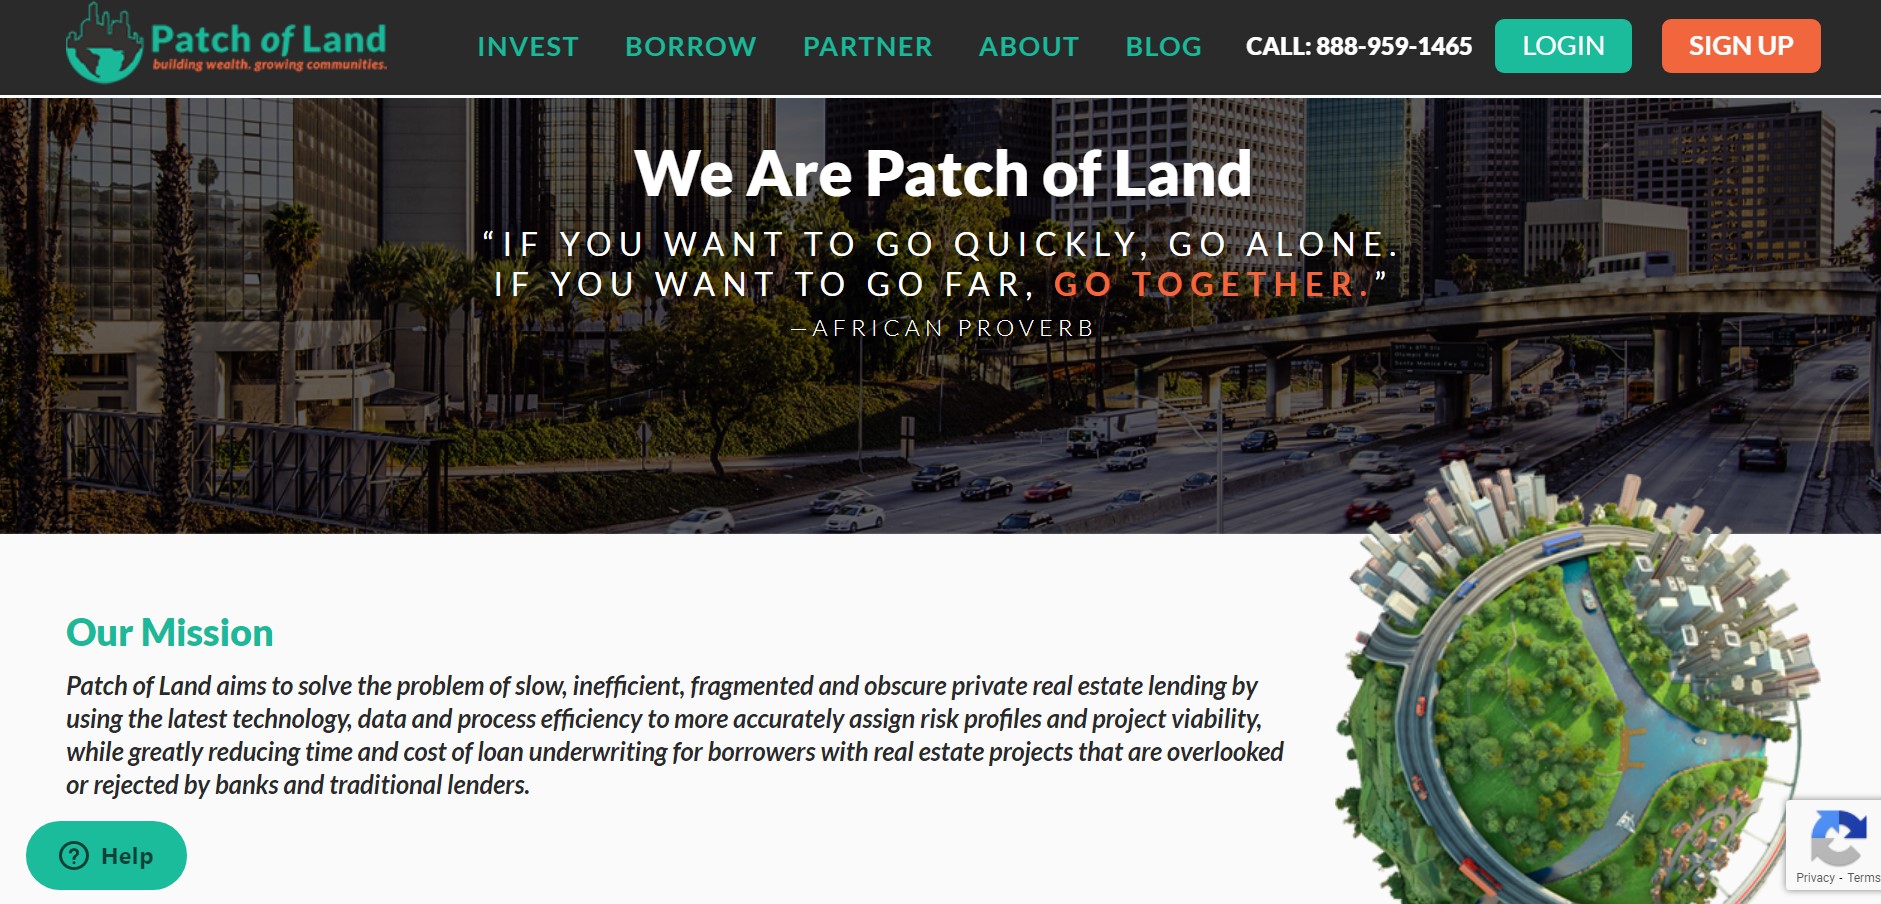 Patch of Land is one of our favorite crowdfunding websites.